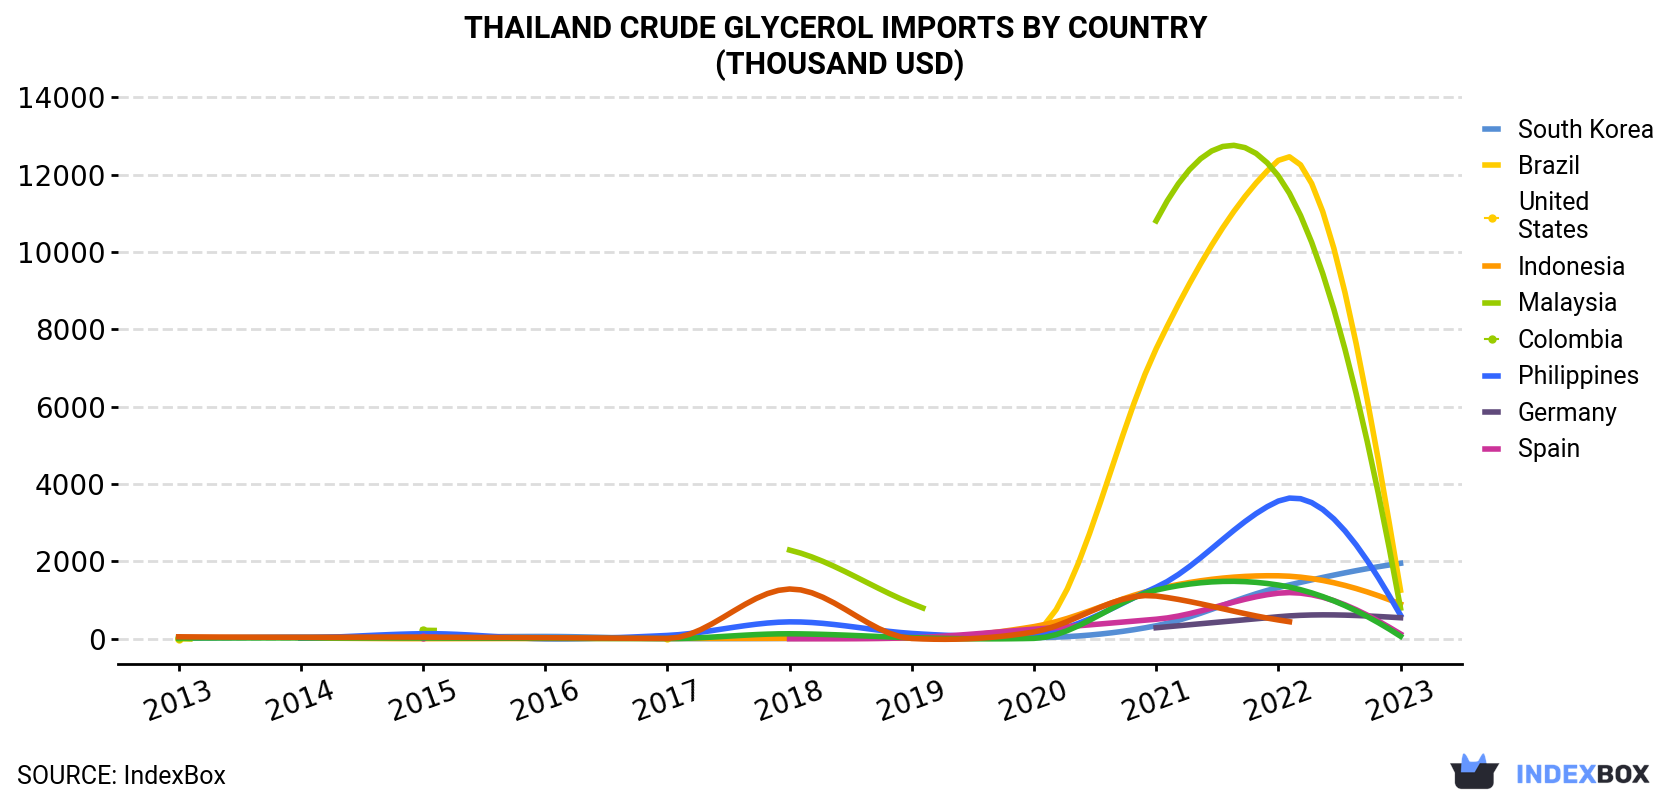 Thailand Crude Glycerol Imports By Country (Thousand USD)